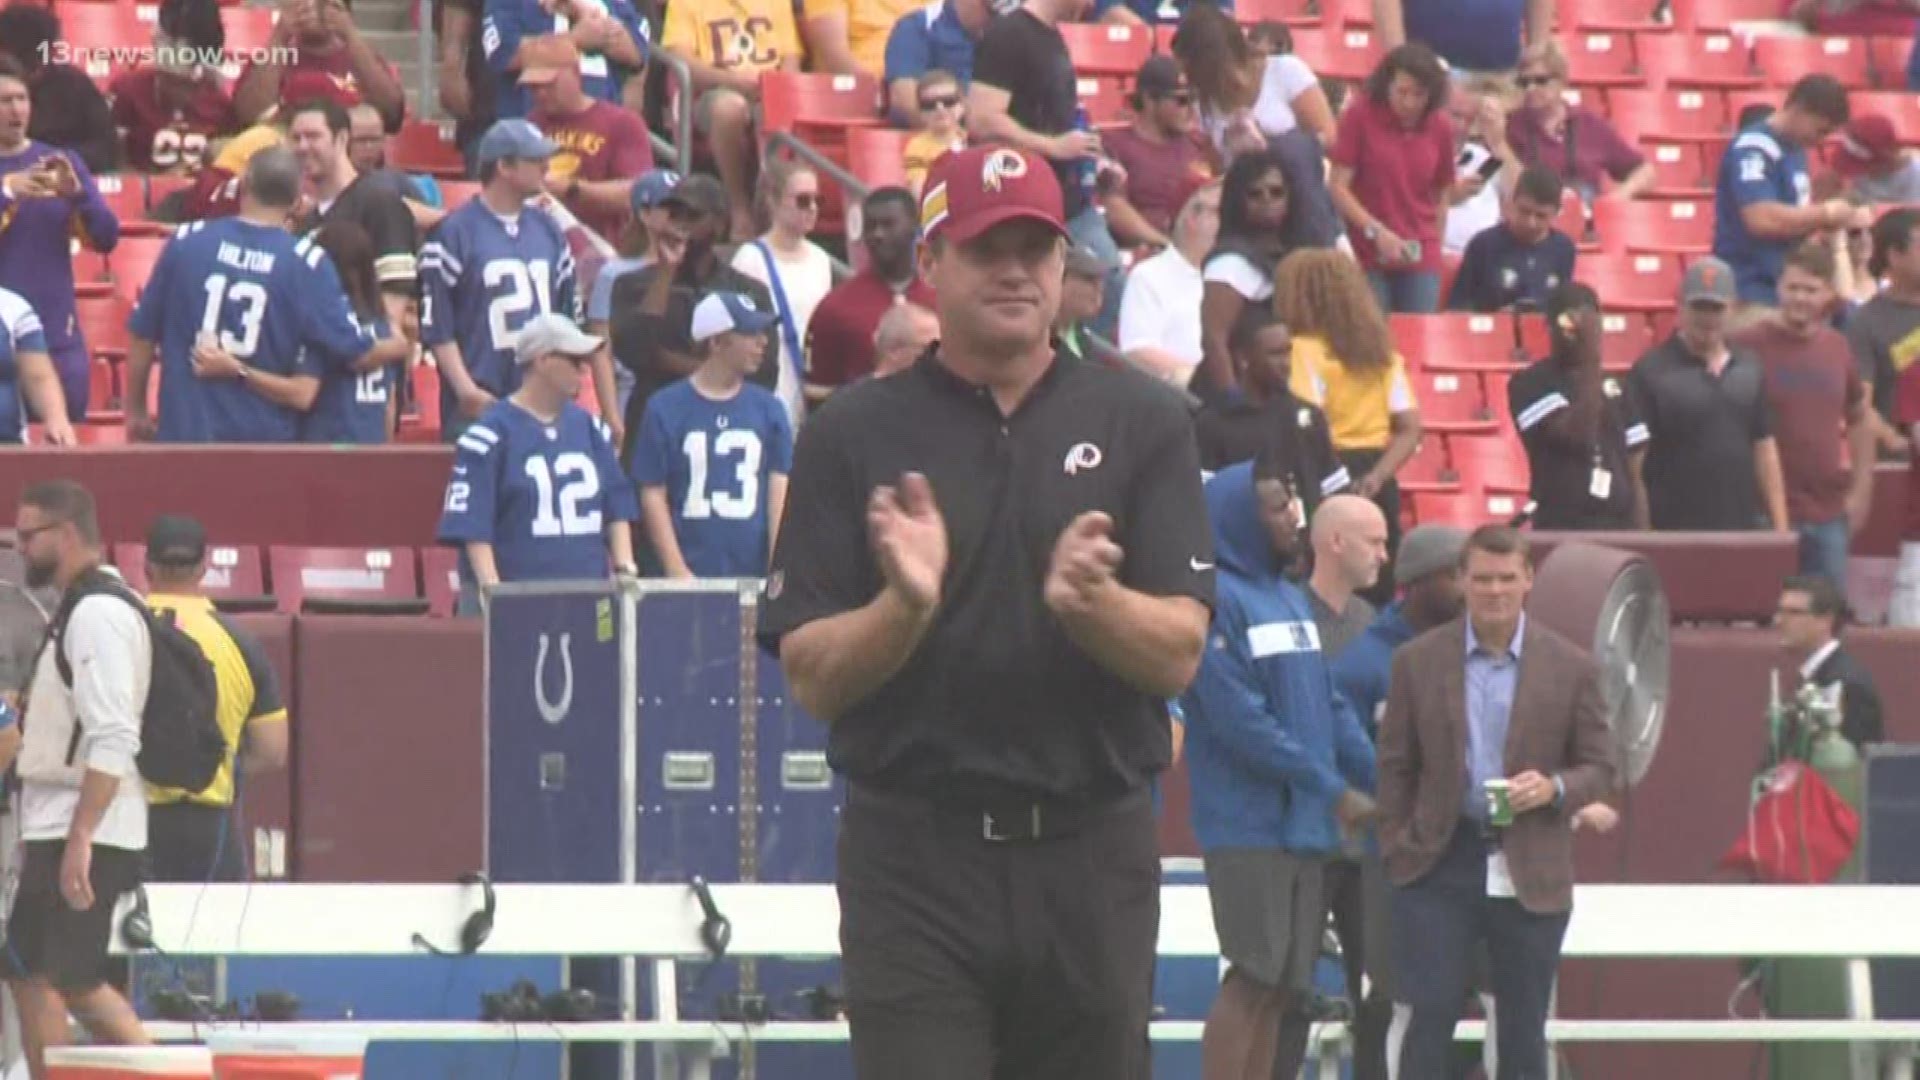 Off to a disappointing (0-5) start, Redskins management felt it was time for a change.